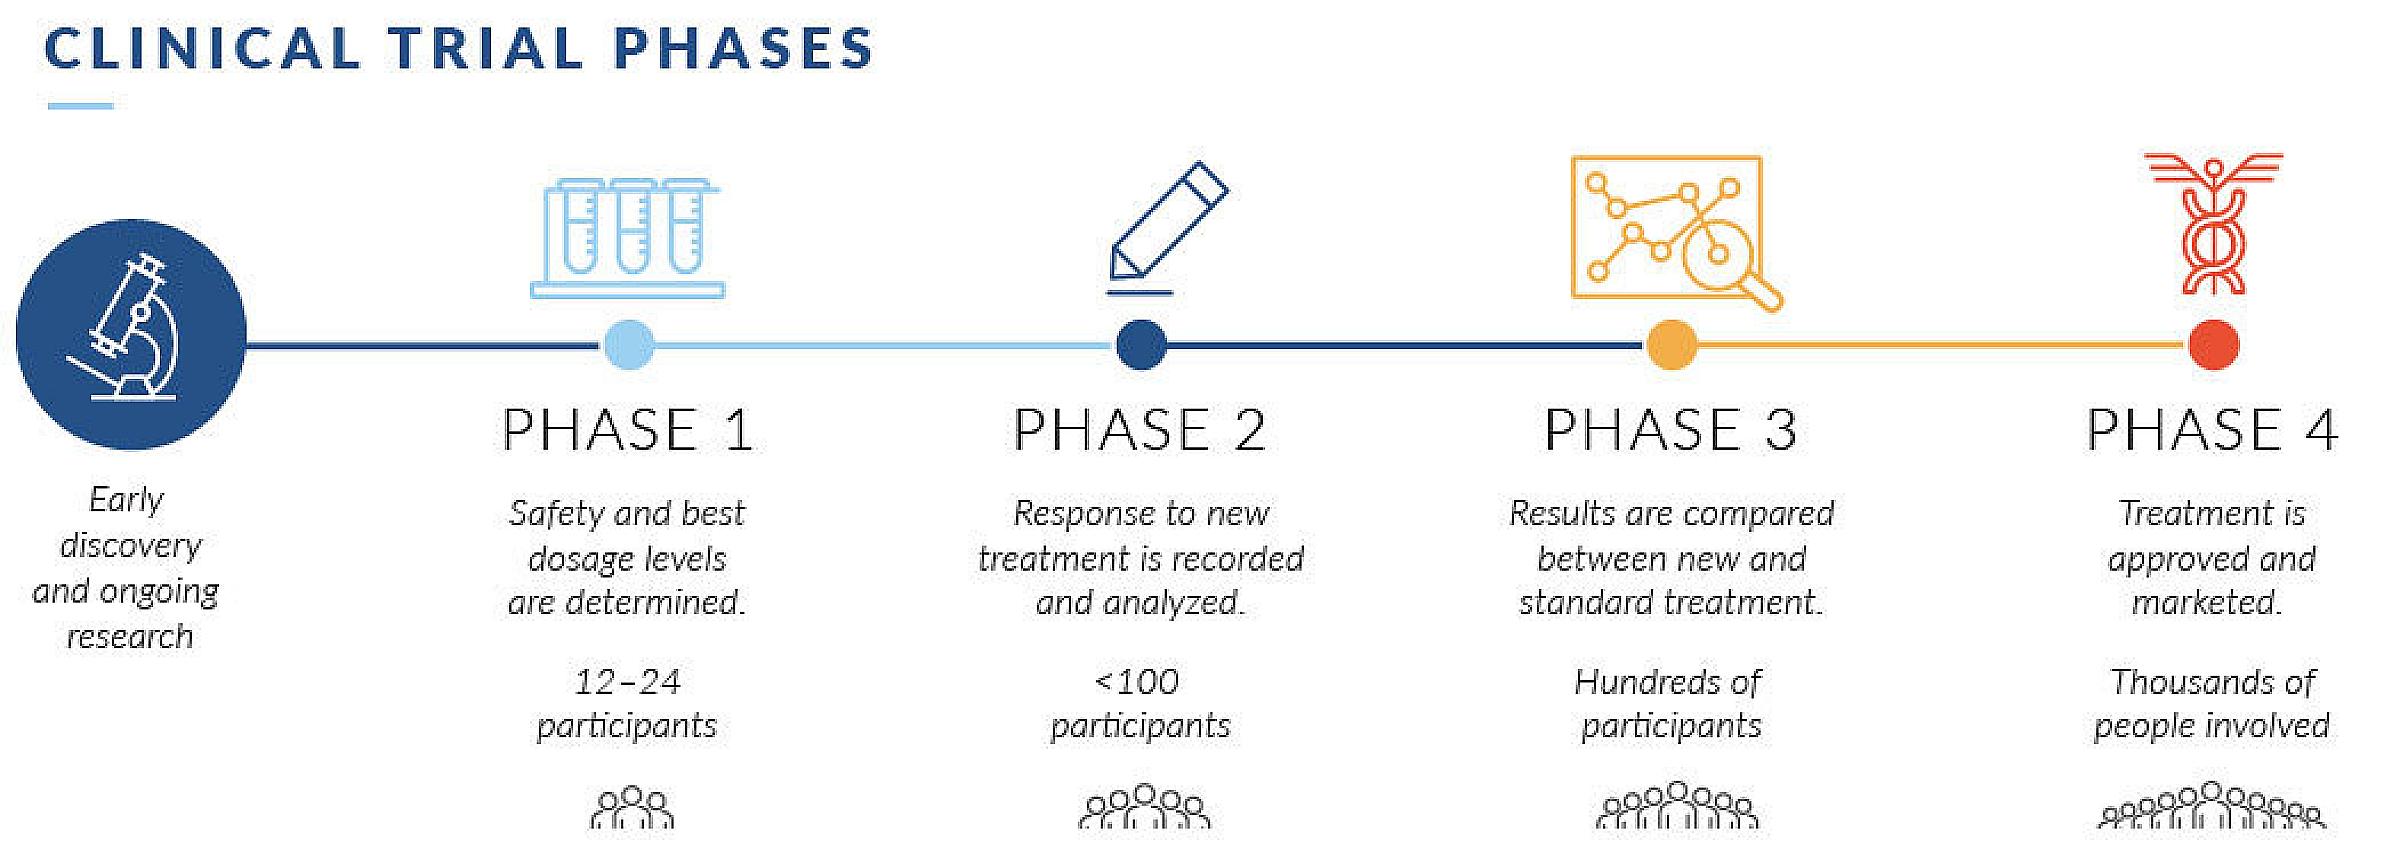 Phases of clinical trials